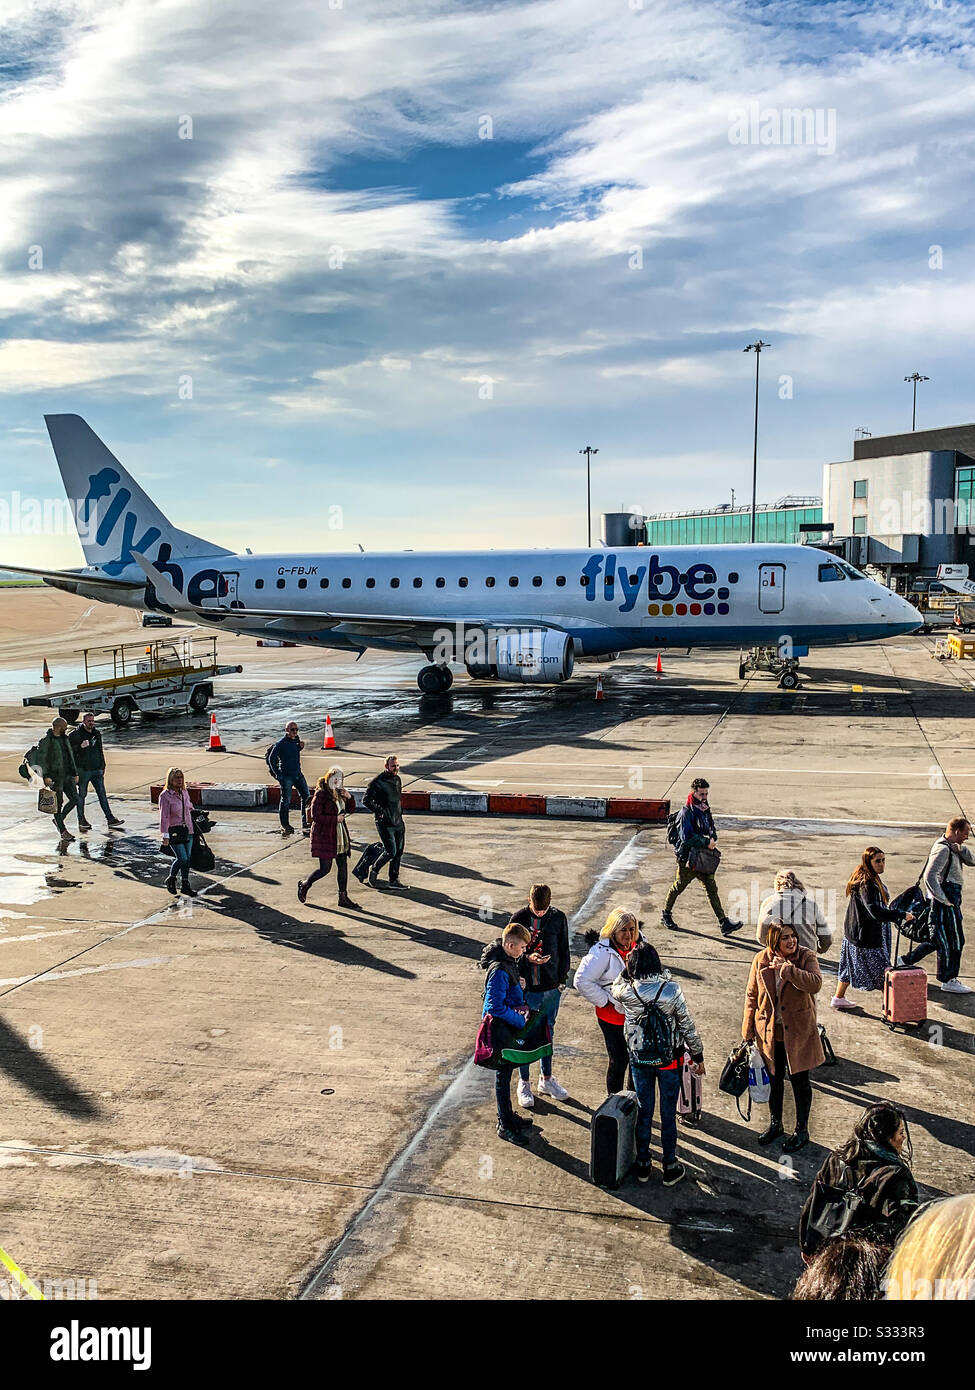 Flybe Embraer ERJ 175 plane at Manchester Airport Stock Photo